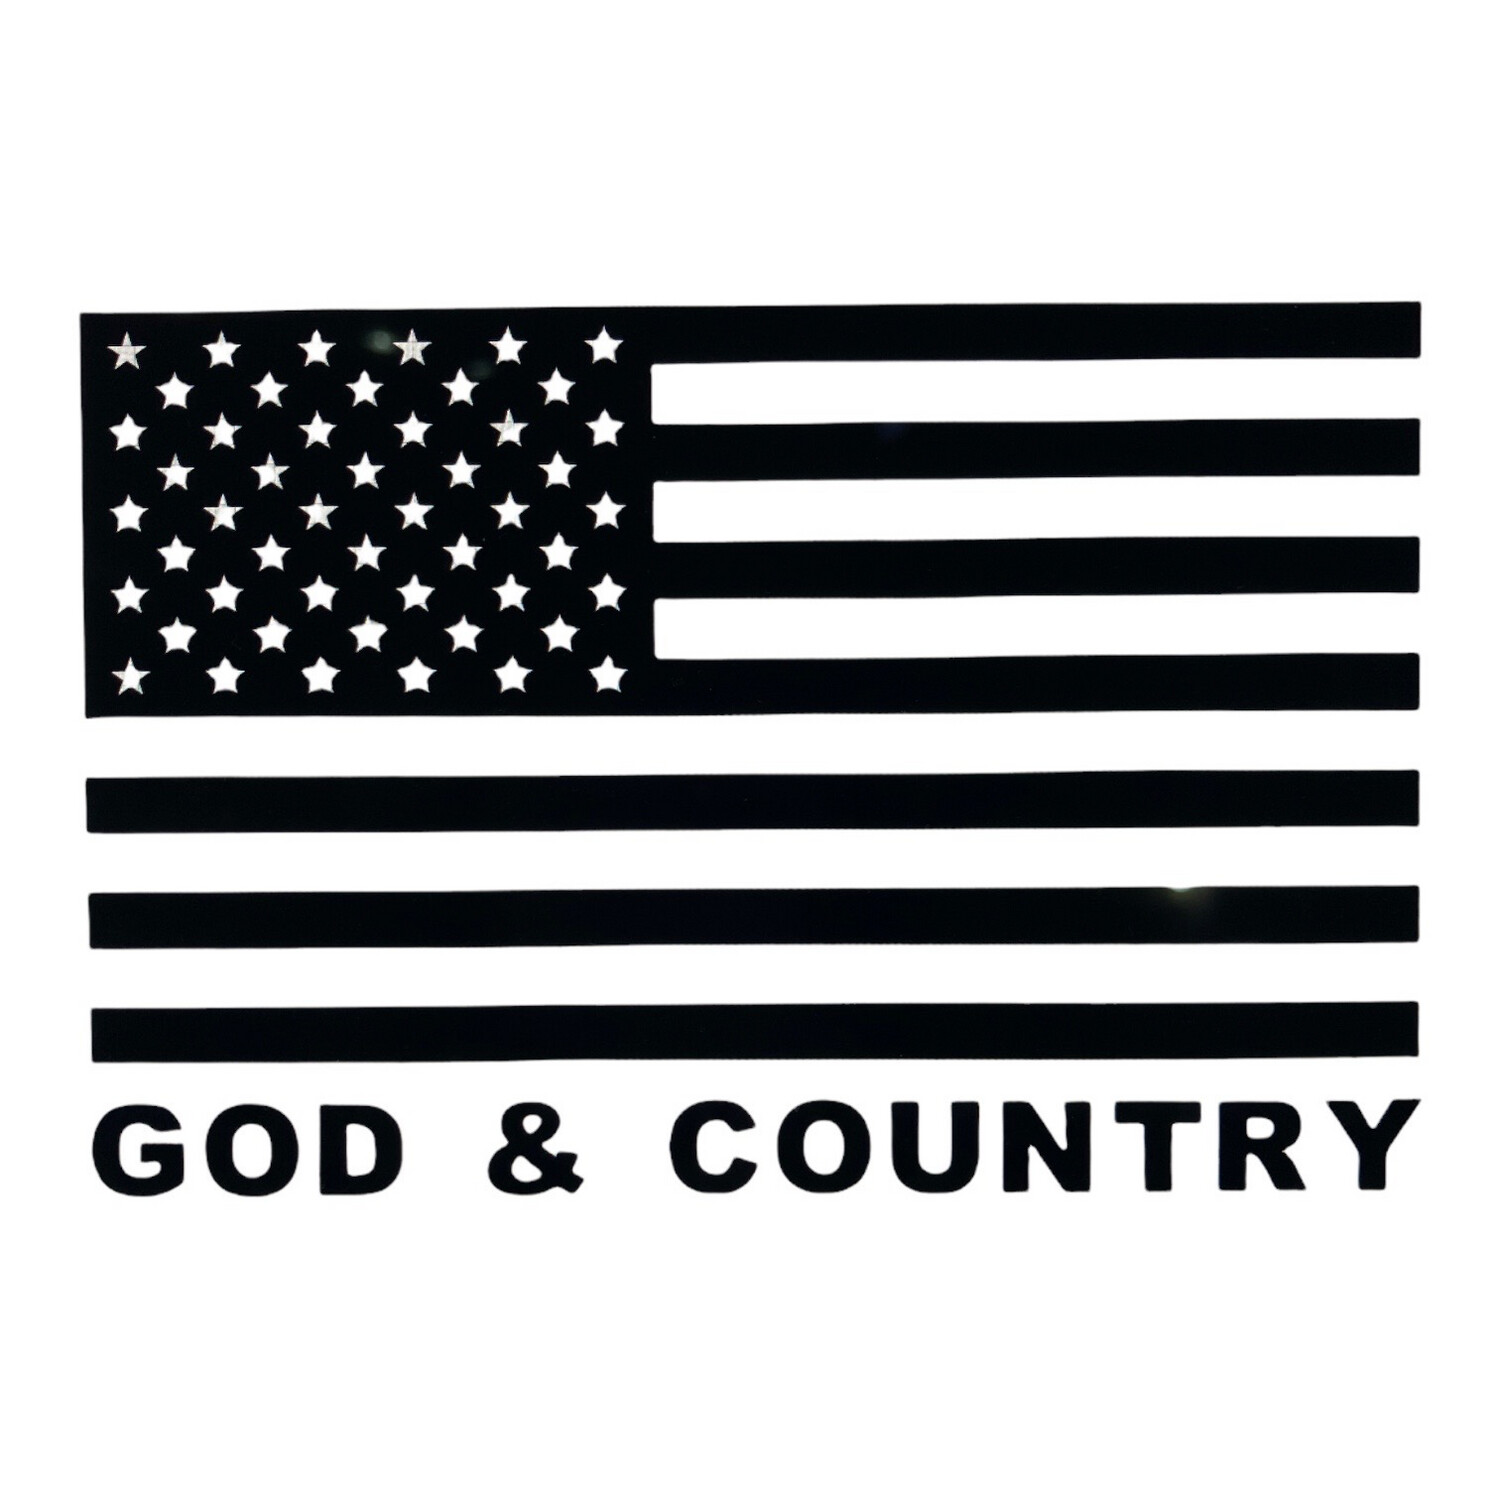 God & Country Decal 8.5